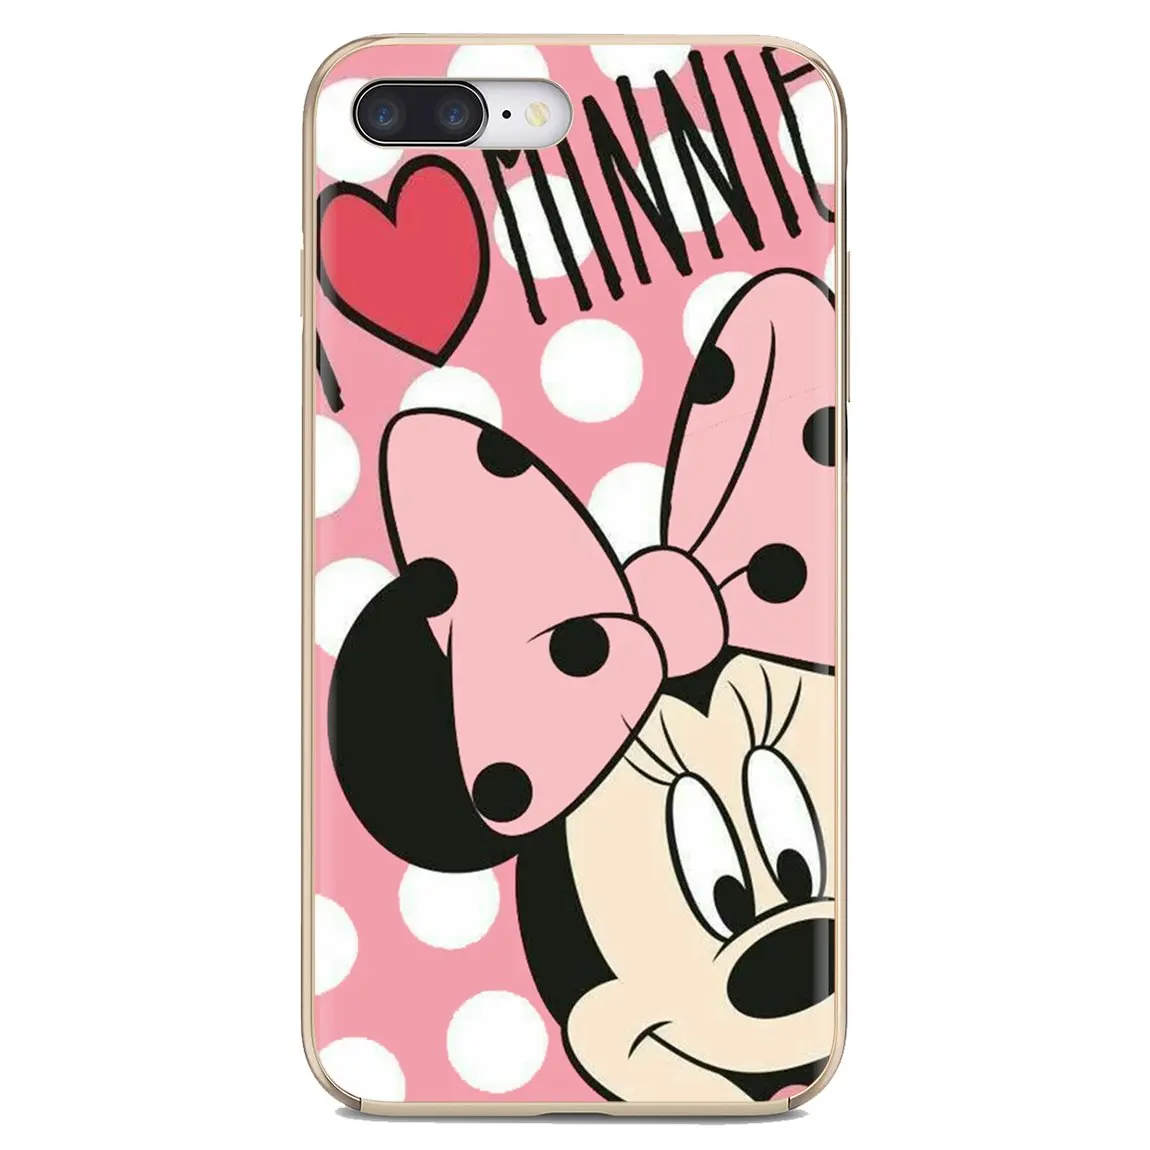 pink minnie Mouse girly For Meizu M6 M5 M6S M5S M2 M3 M3S NOTE MX6 M6t 6 5 Pro Plus U20 Soft Cover Bag meizu cover Cases For Meizu